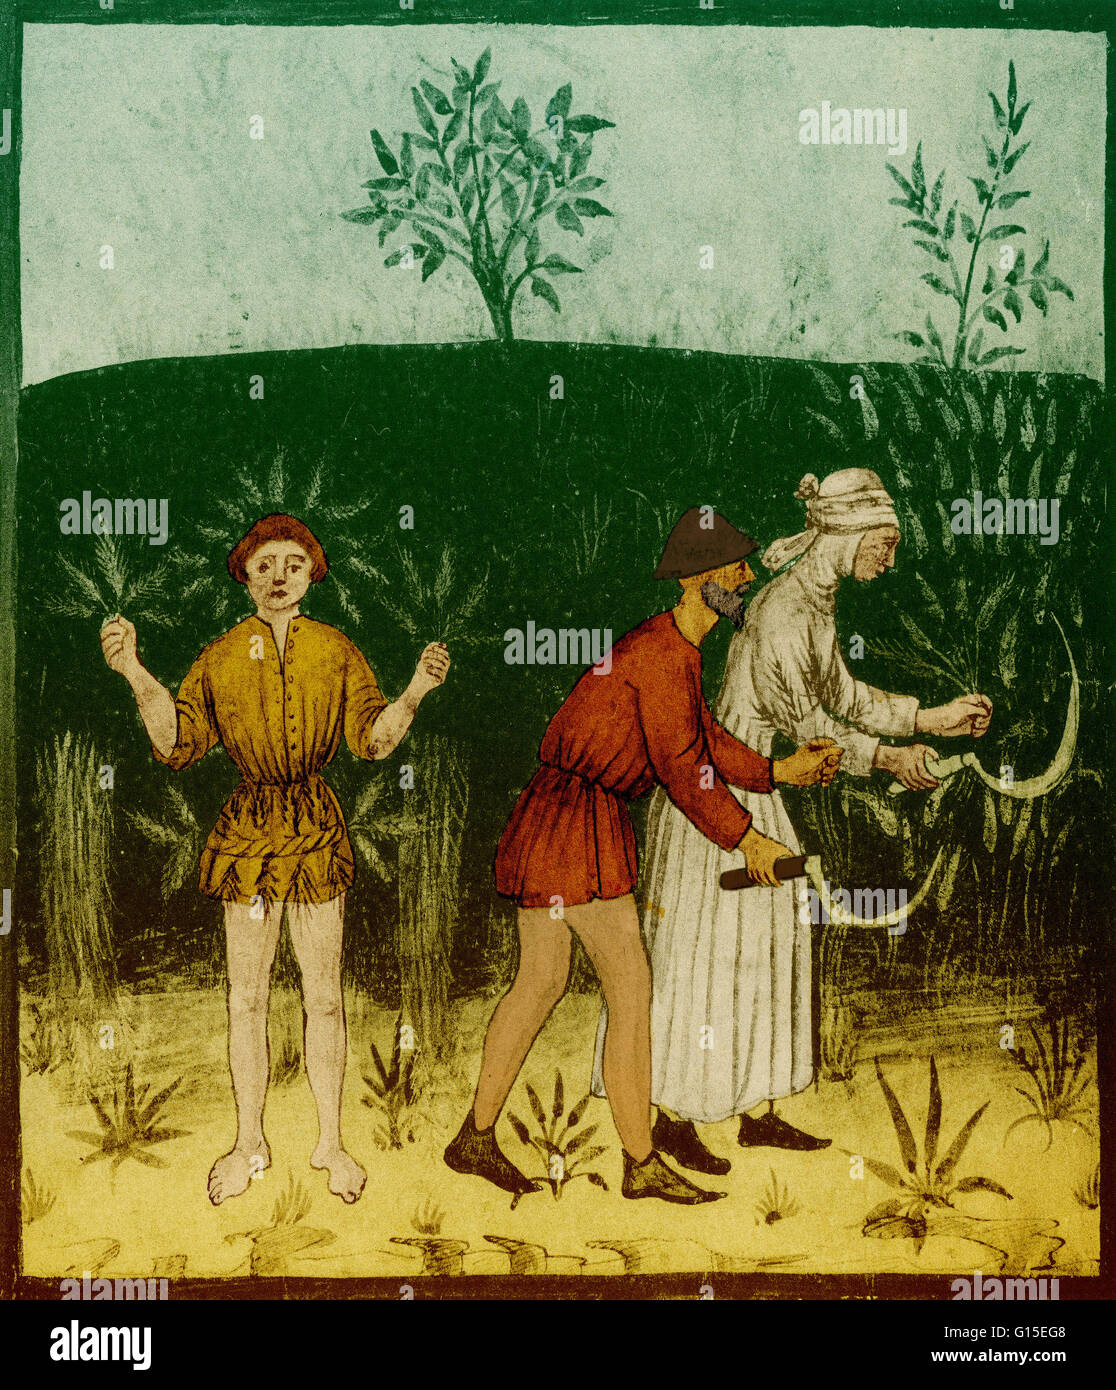 Agriculture in the 1400s. Stock Photo